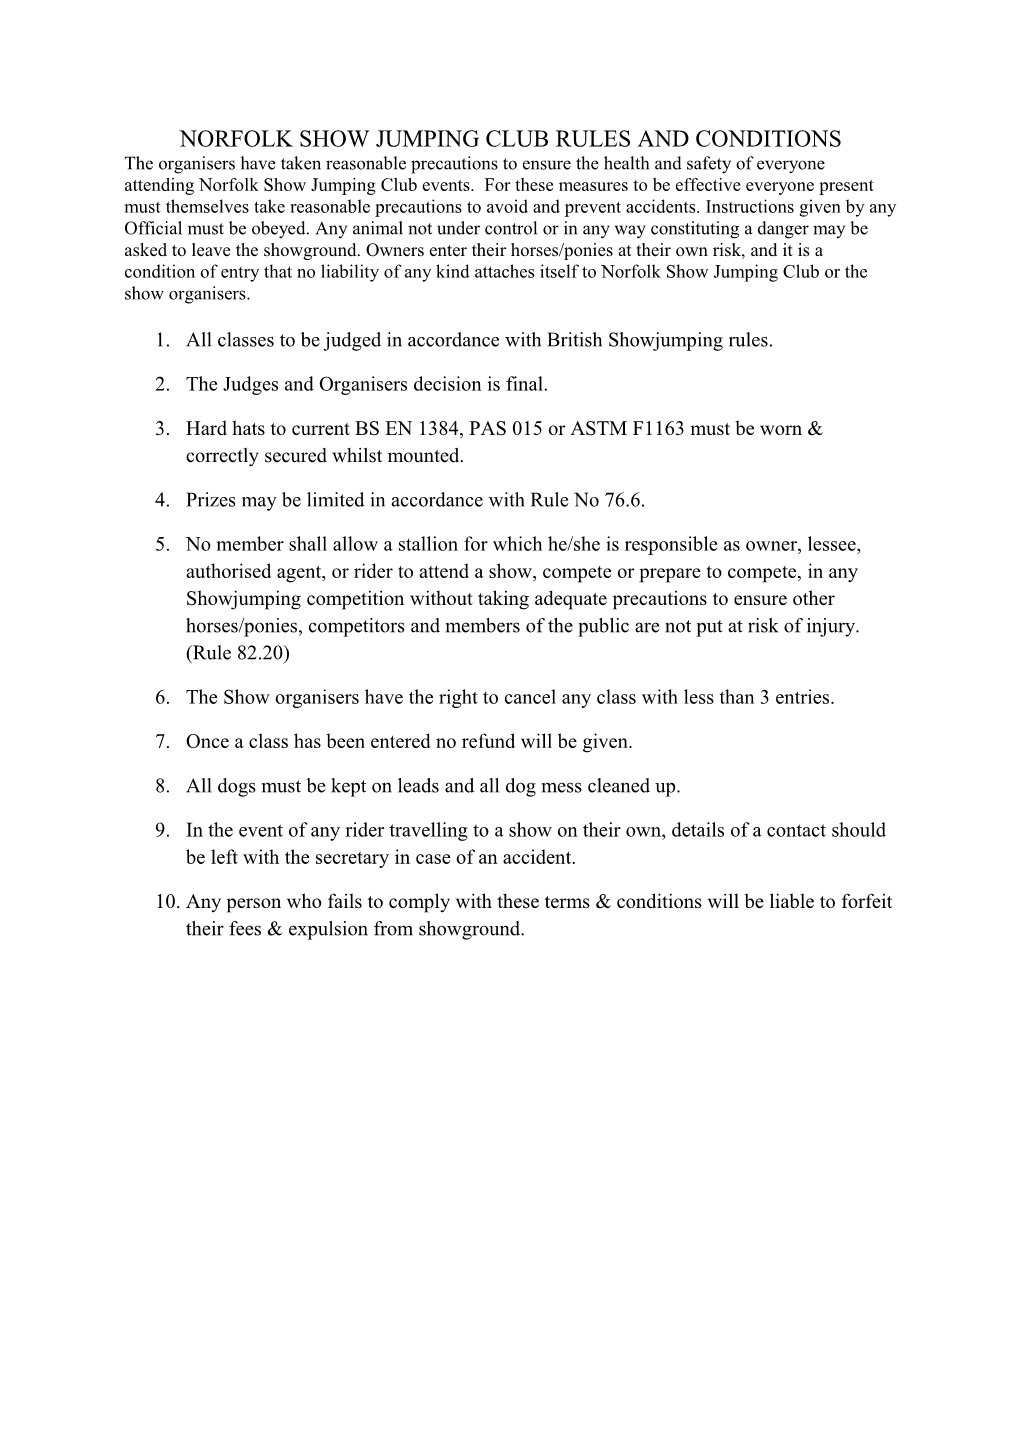 Norfolk Show Jumping Club Rules and Conditions